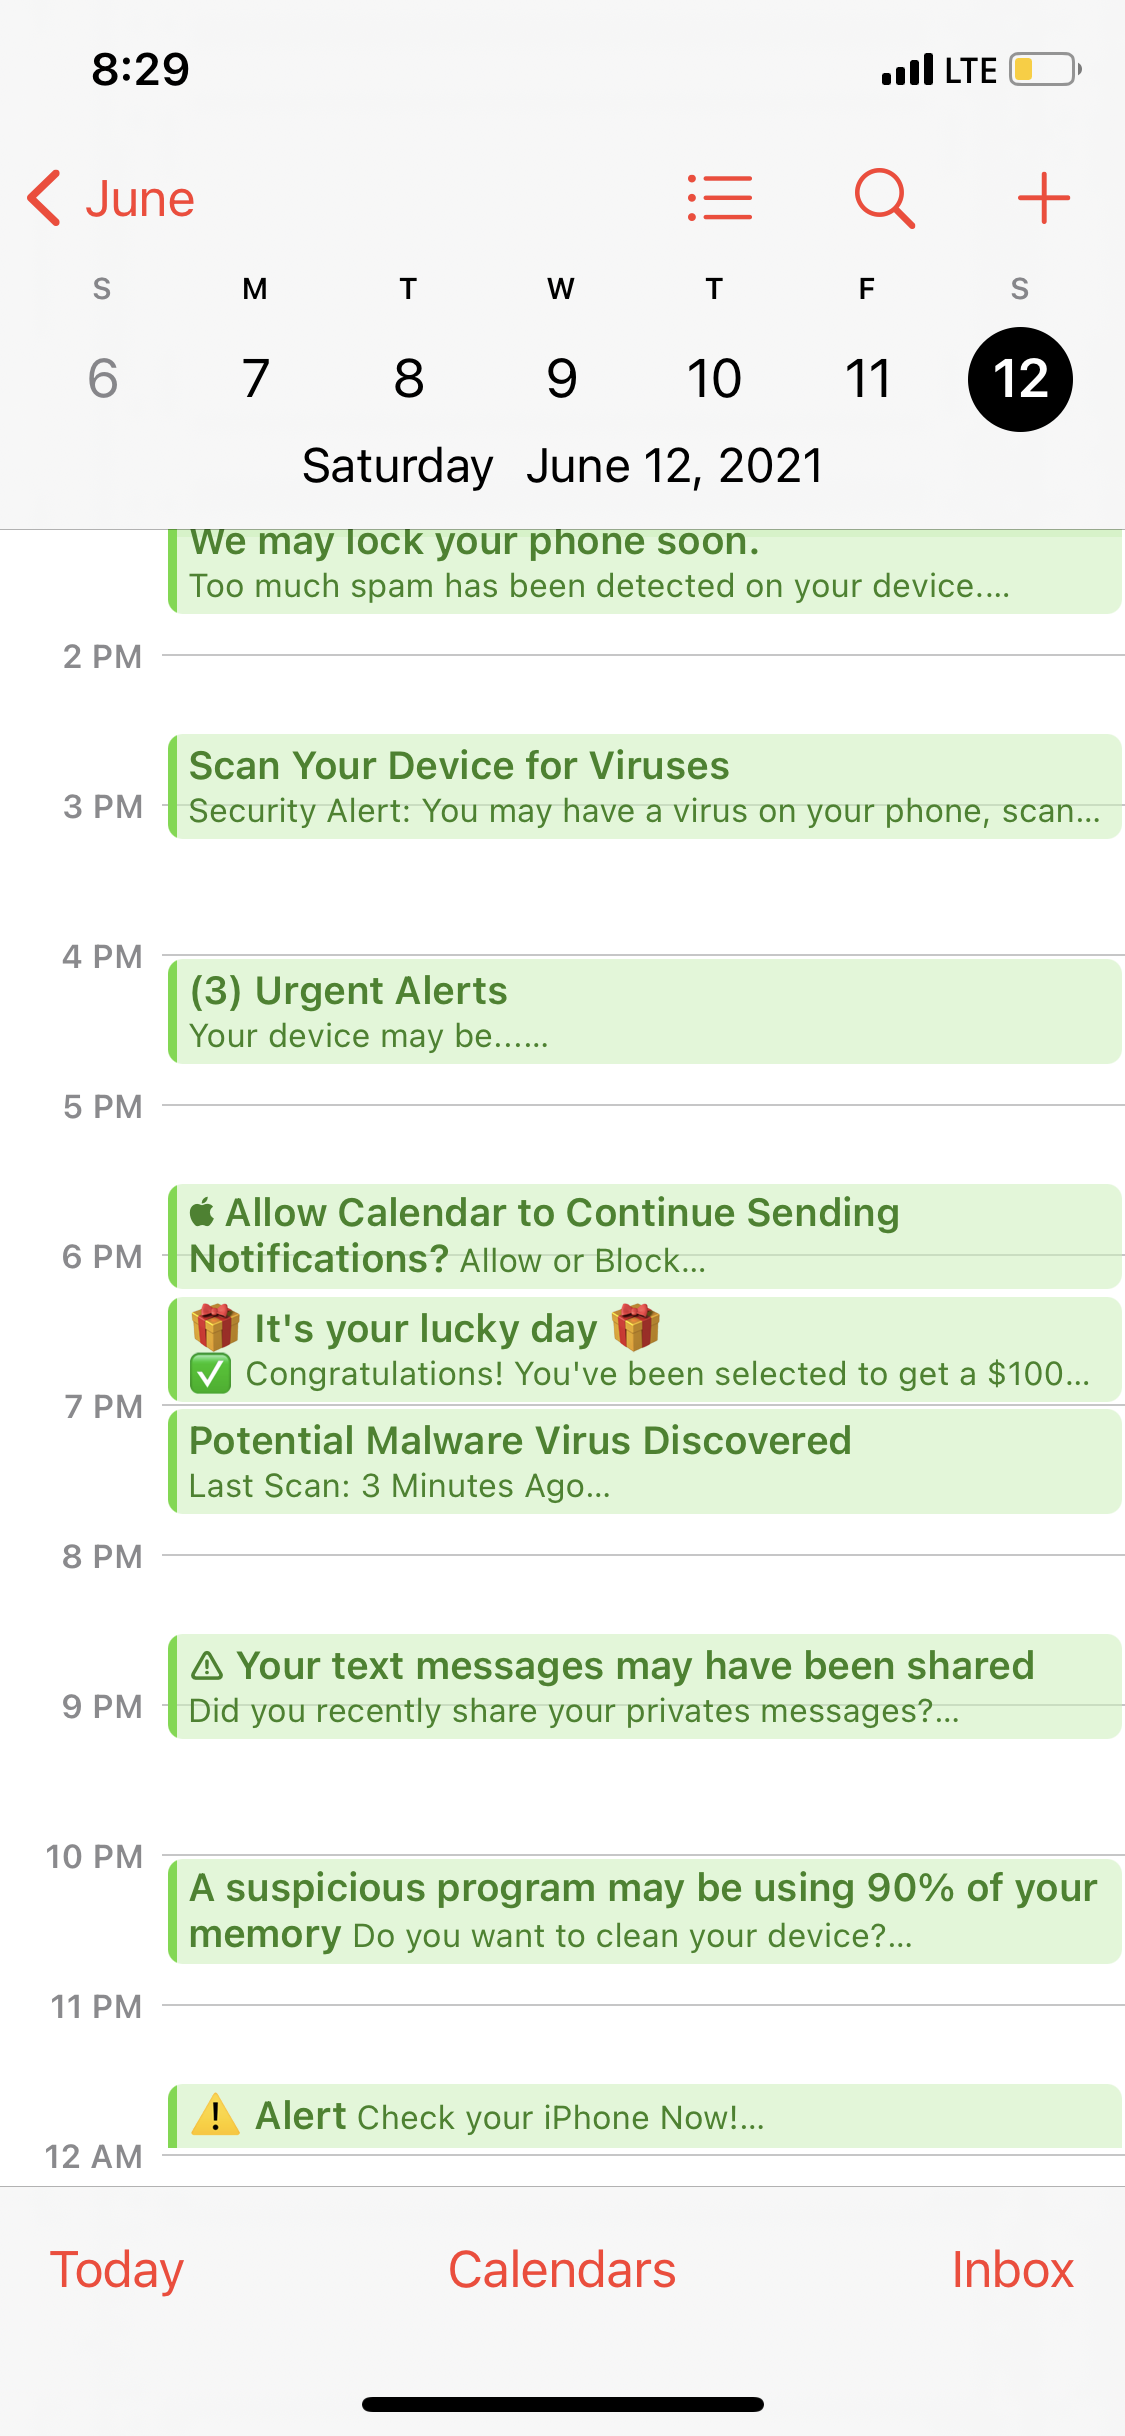 How to fix hacked iPhone Calendar? Apple Community